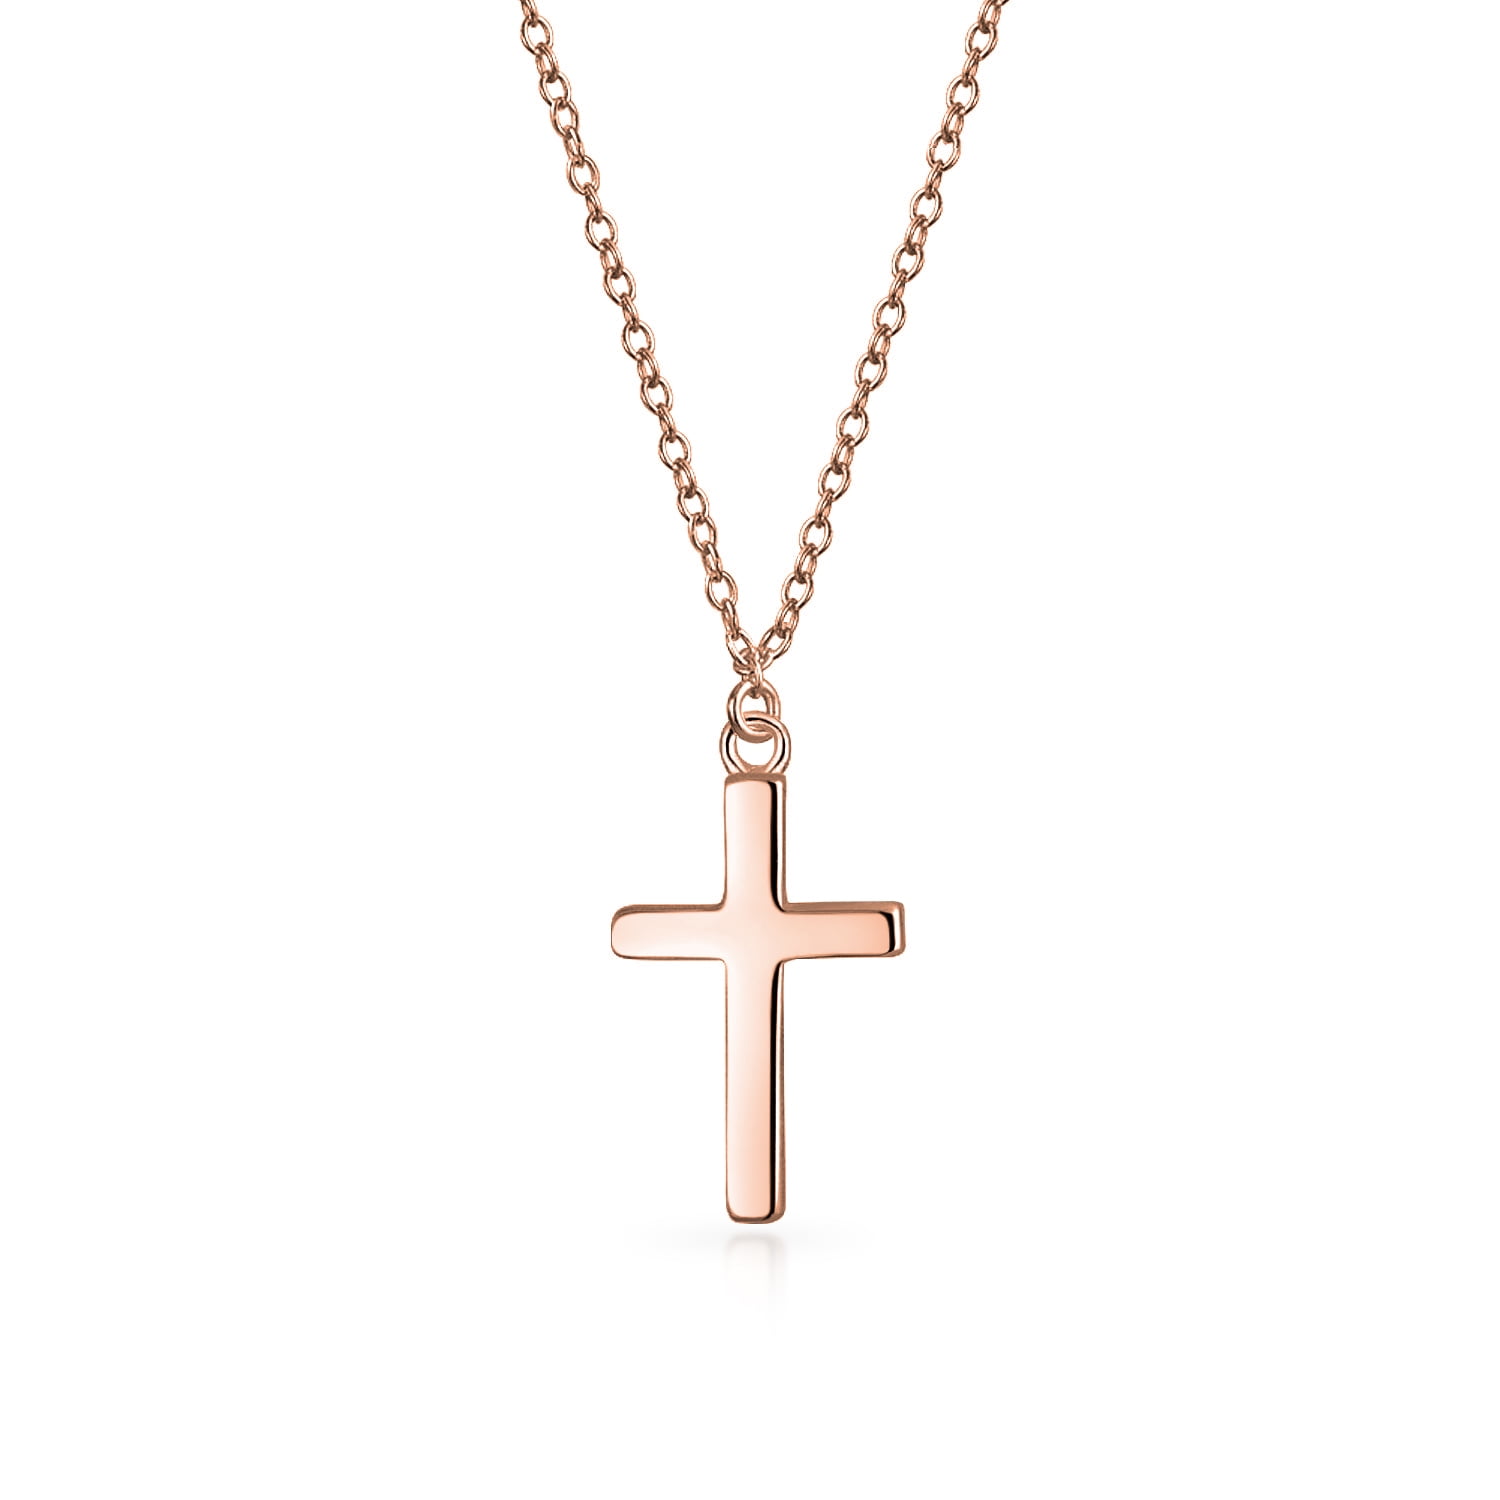 Bling Jewelry - Delicate Small Latin Cross Pendant Necklace for Women